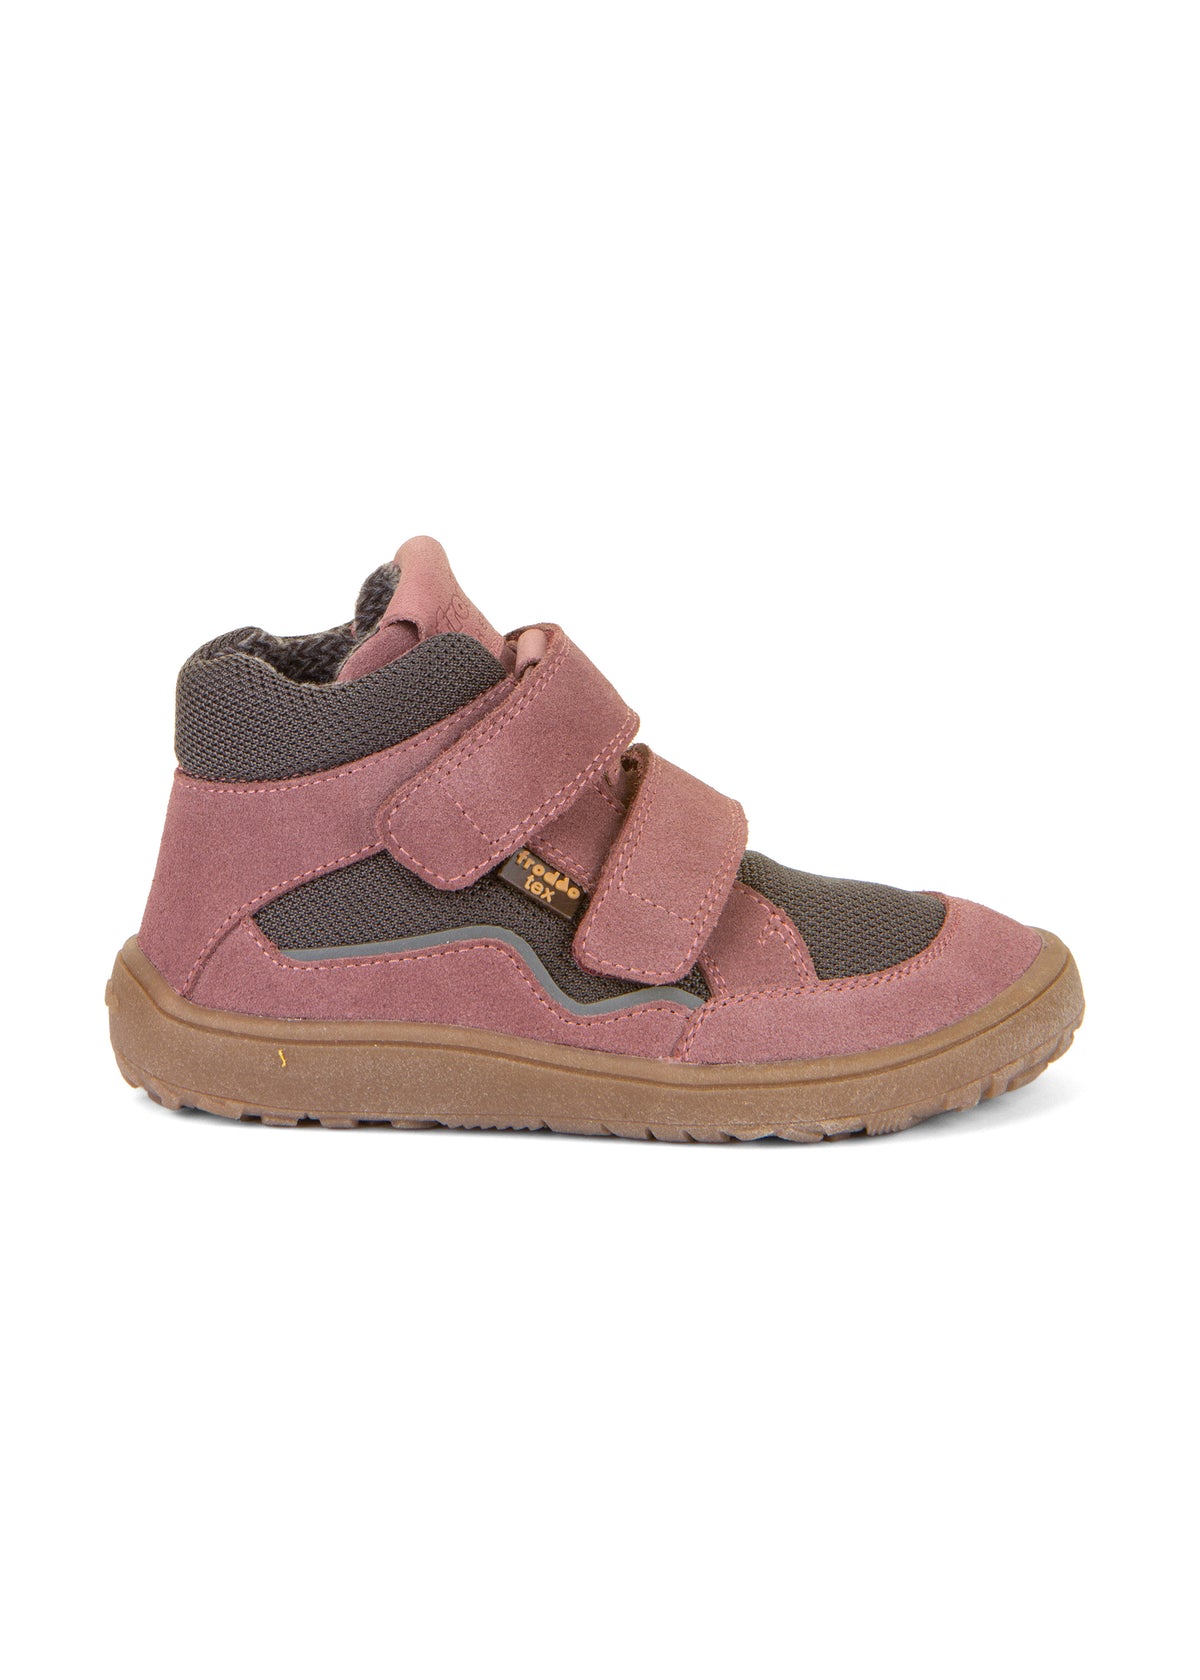 Barefoot sneakers with handles - mid-season shoes, Autumn-TEX, pink